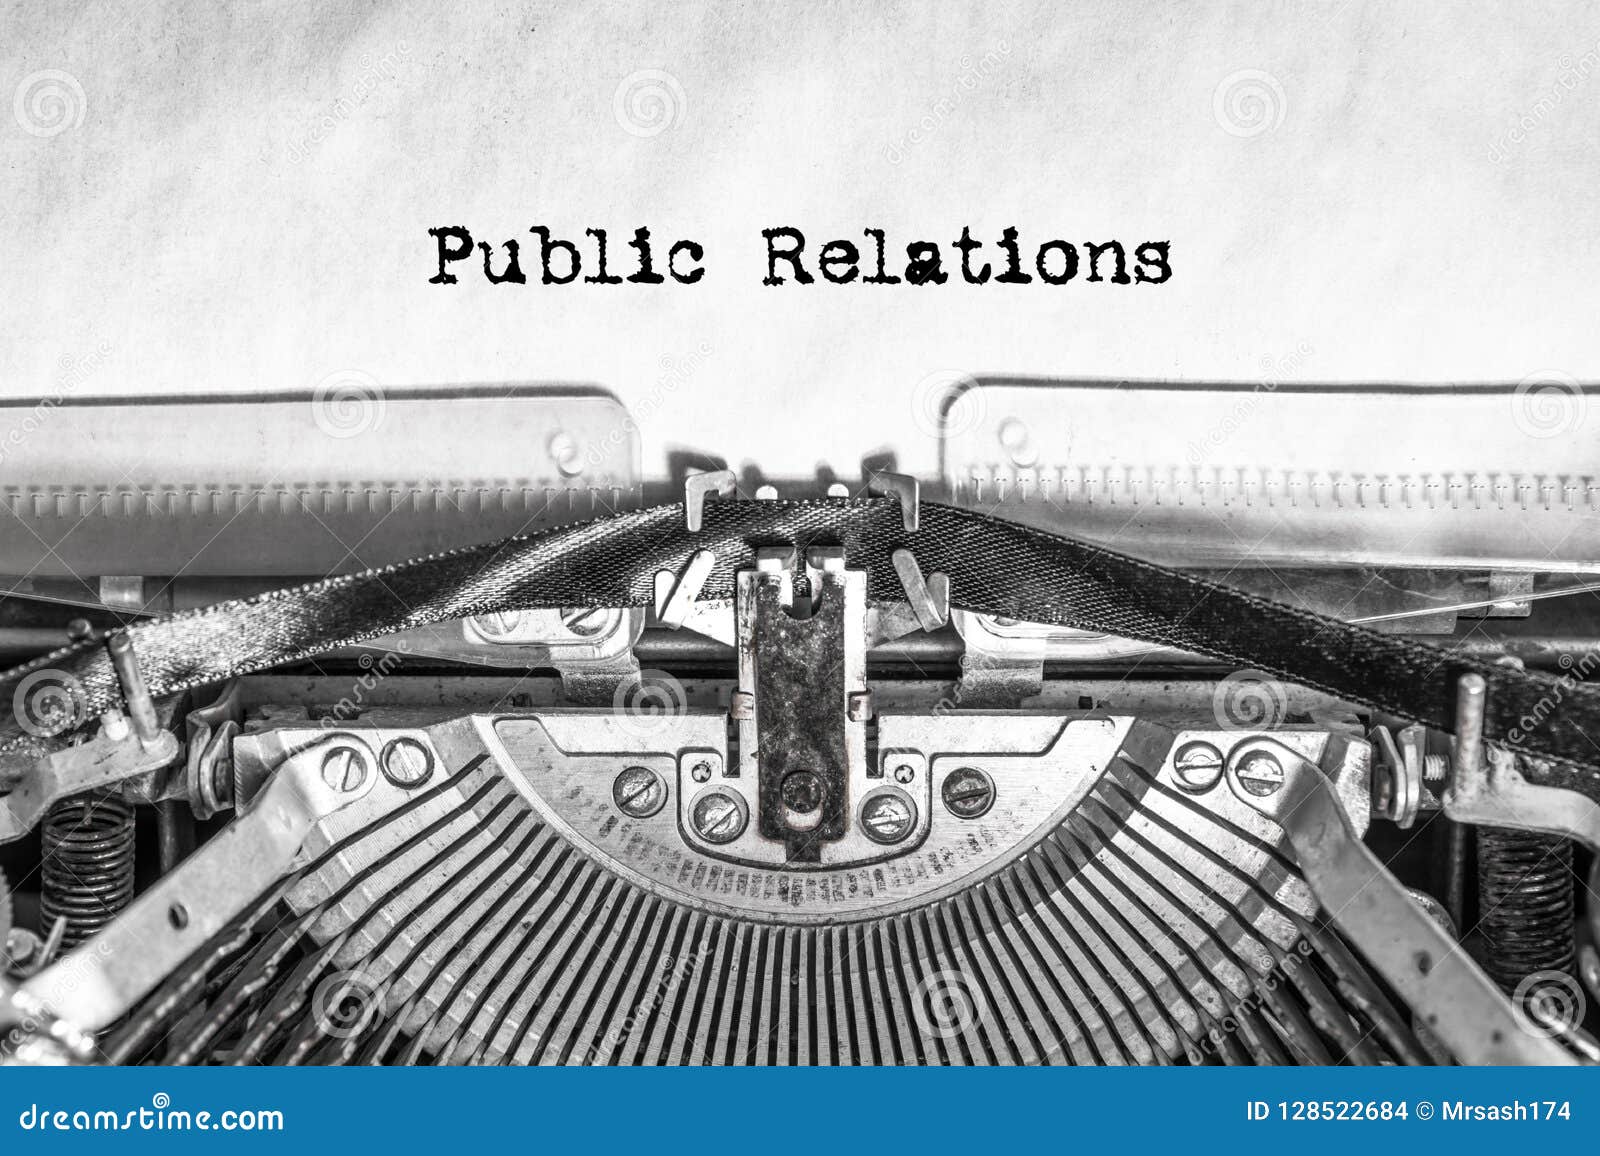 public relations typed text